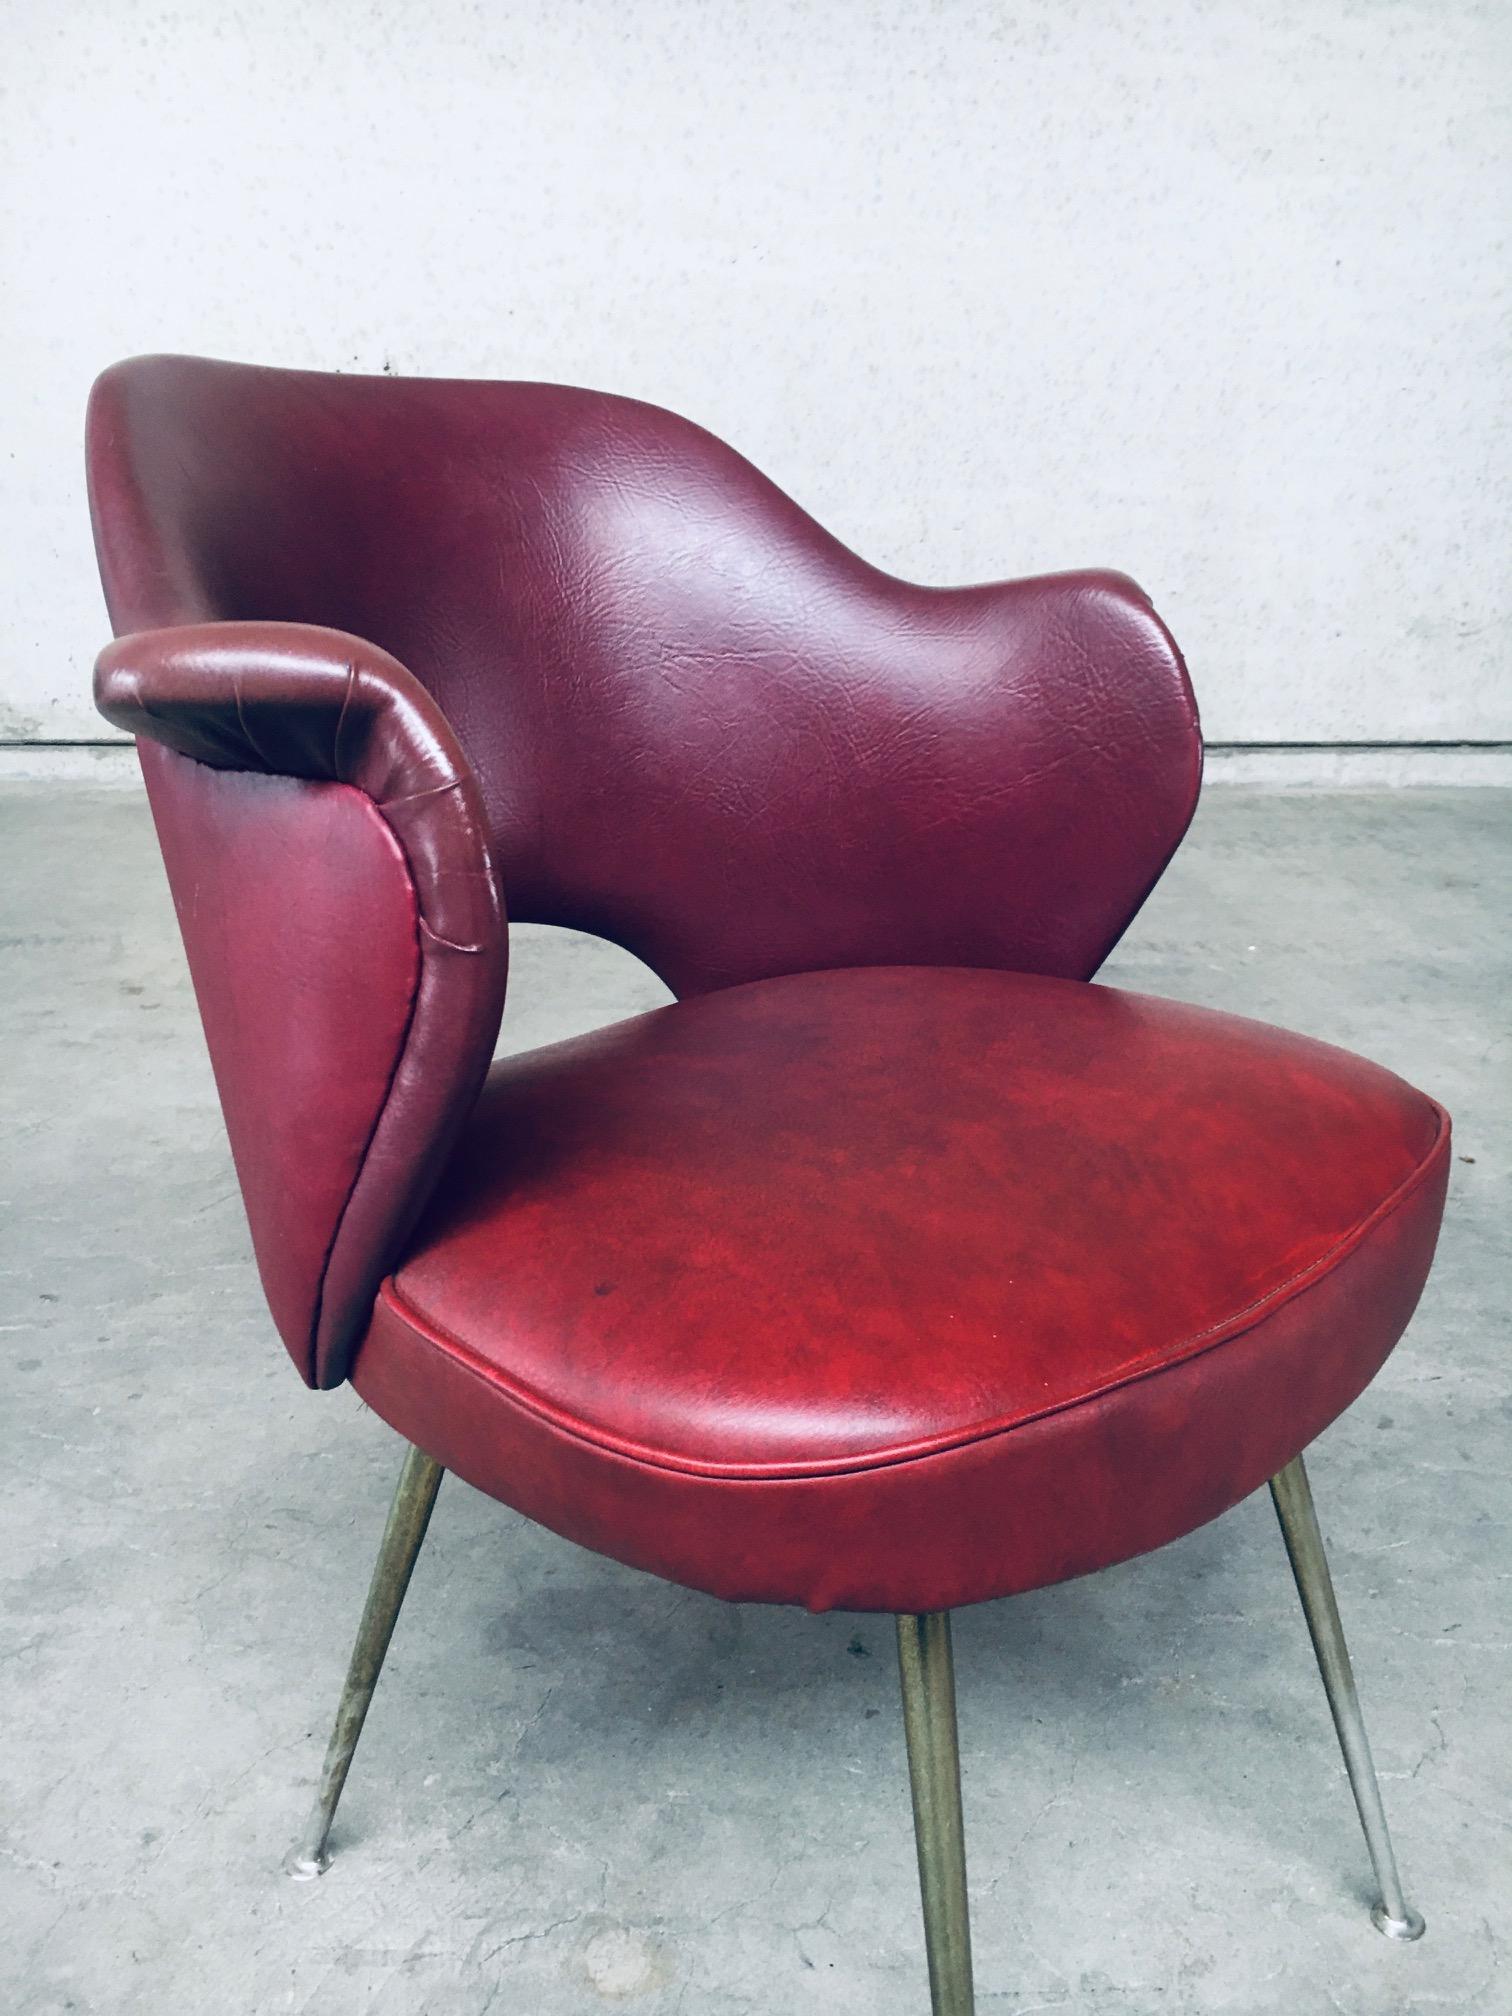 Mid-Century Modern Design Skai Leather Office Chair Set, Italy, 1950s For Sale 11